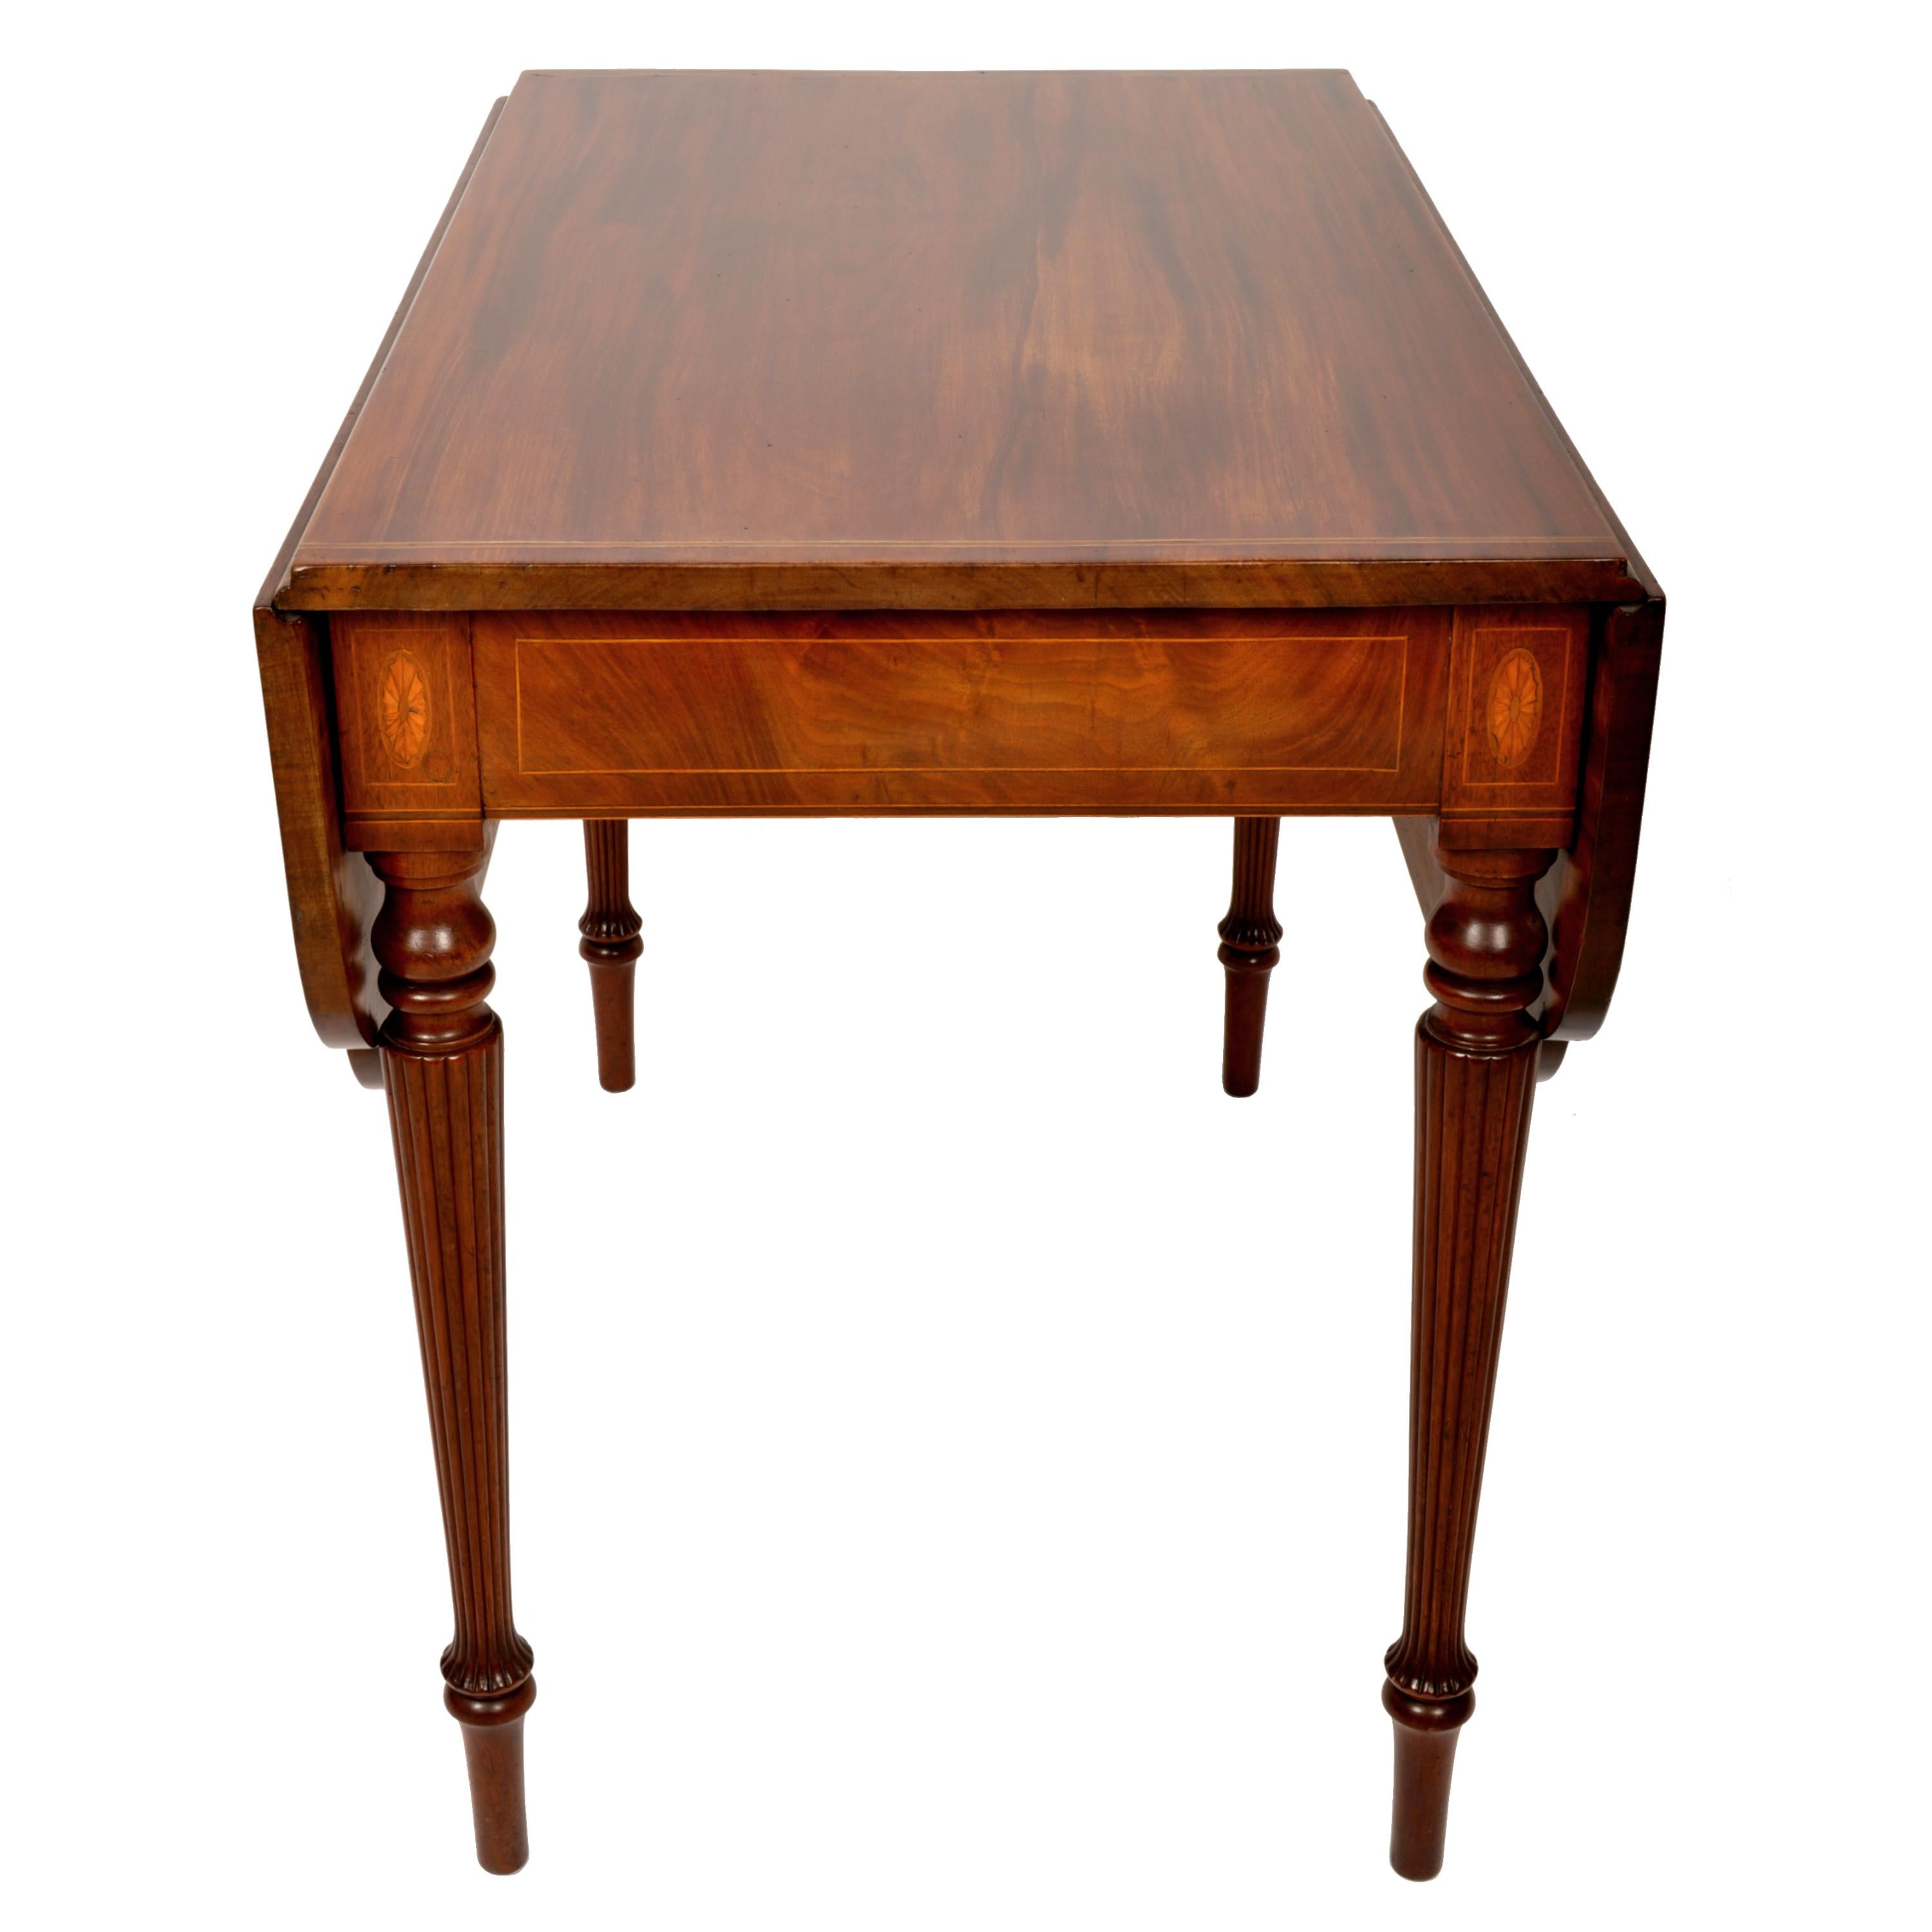 A very fine antique American Sheraton Federal period mahogany Pembroke table, New York, circa 1790. 
This very elegant Federal period table is made from the finest figured Cuban mahogany, the table having twin drop leaves inlaid with satinwood